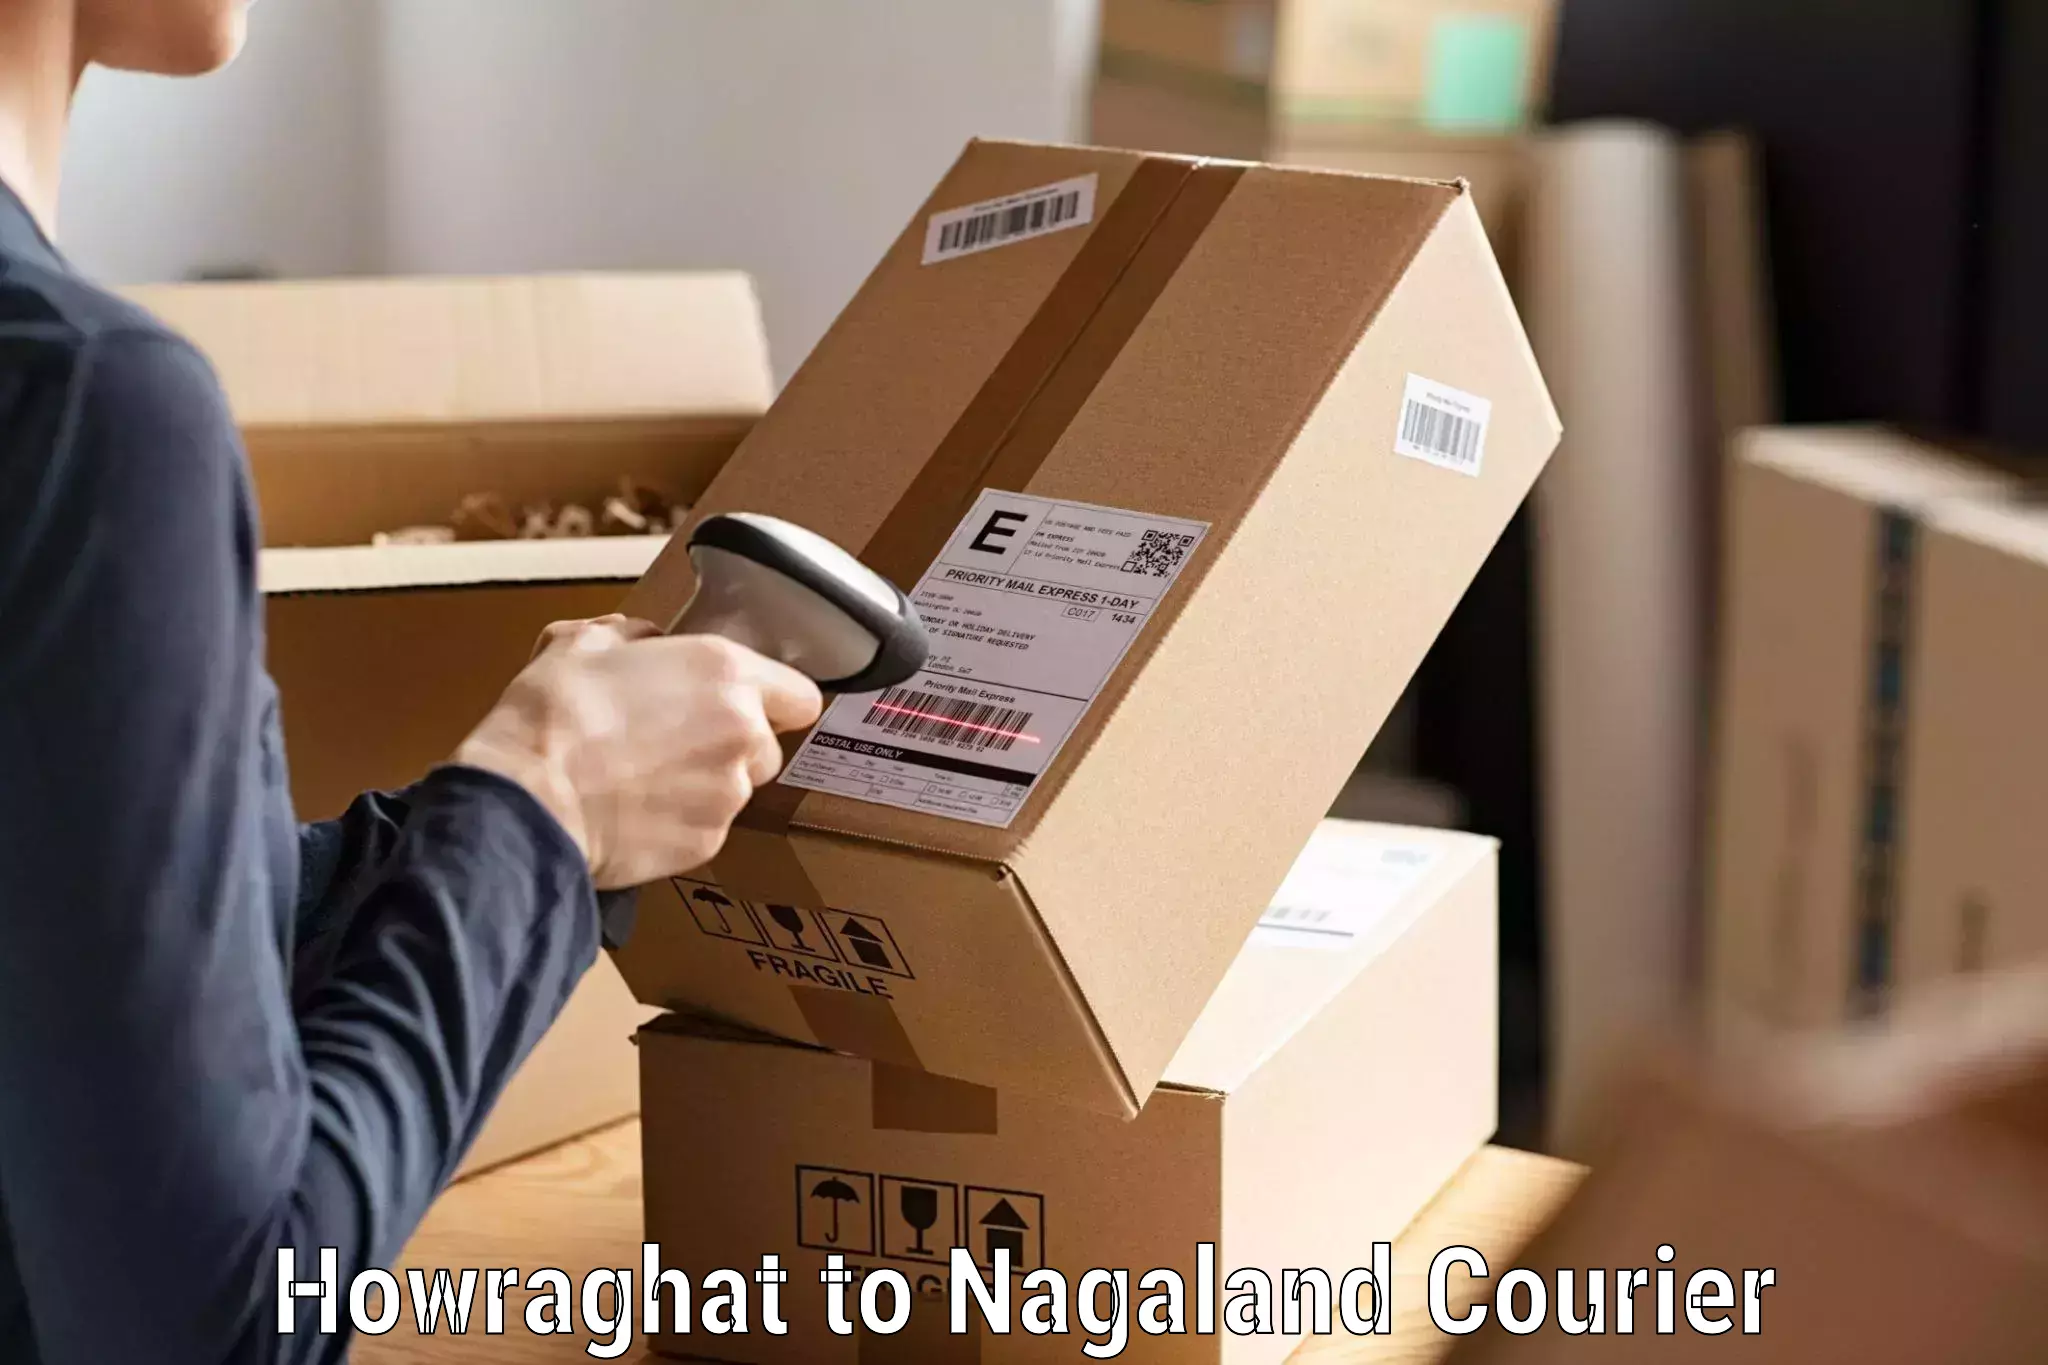 Multi-service courier options Howraghat to NIT Nagaland